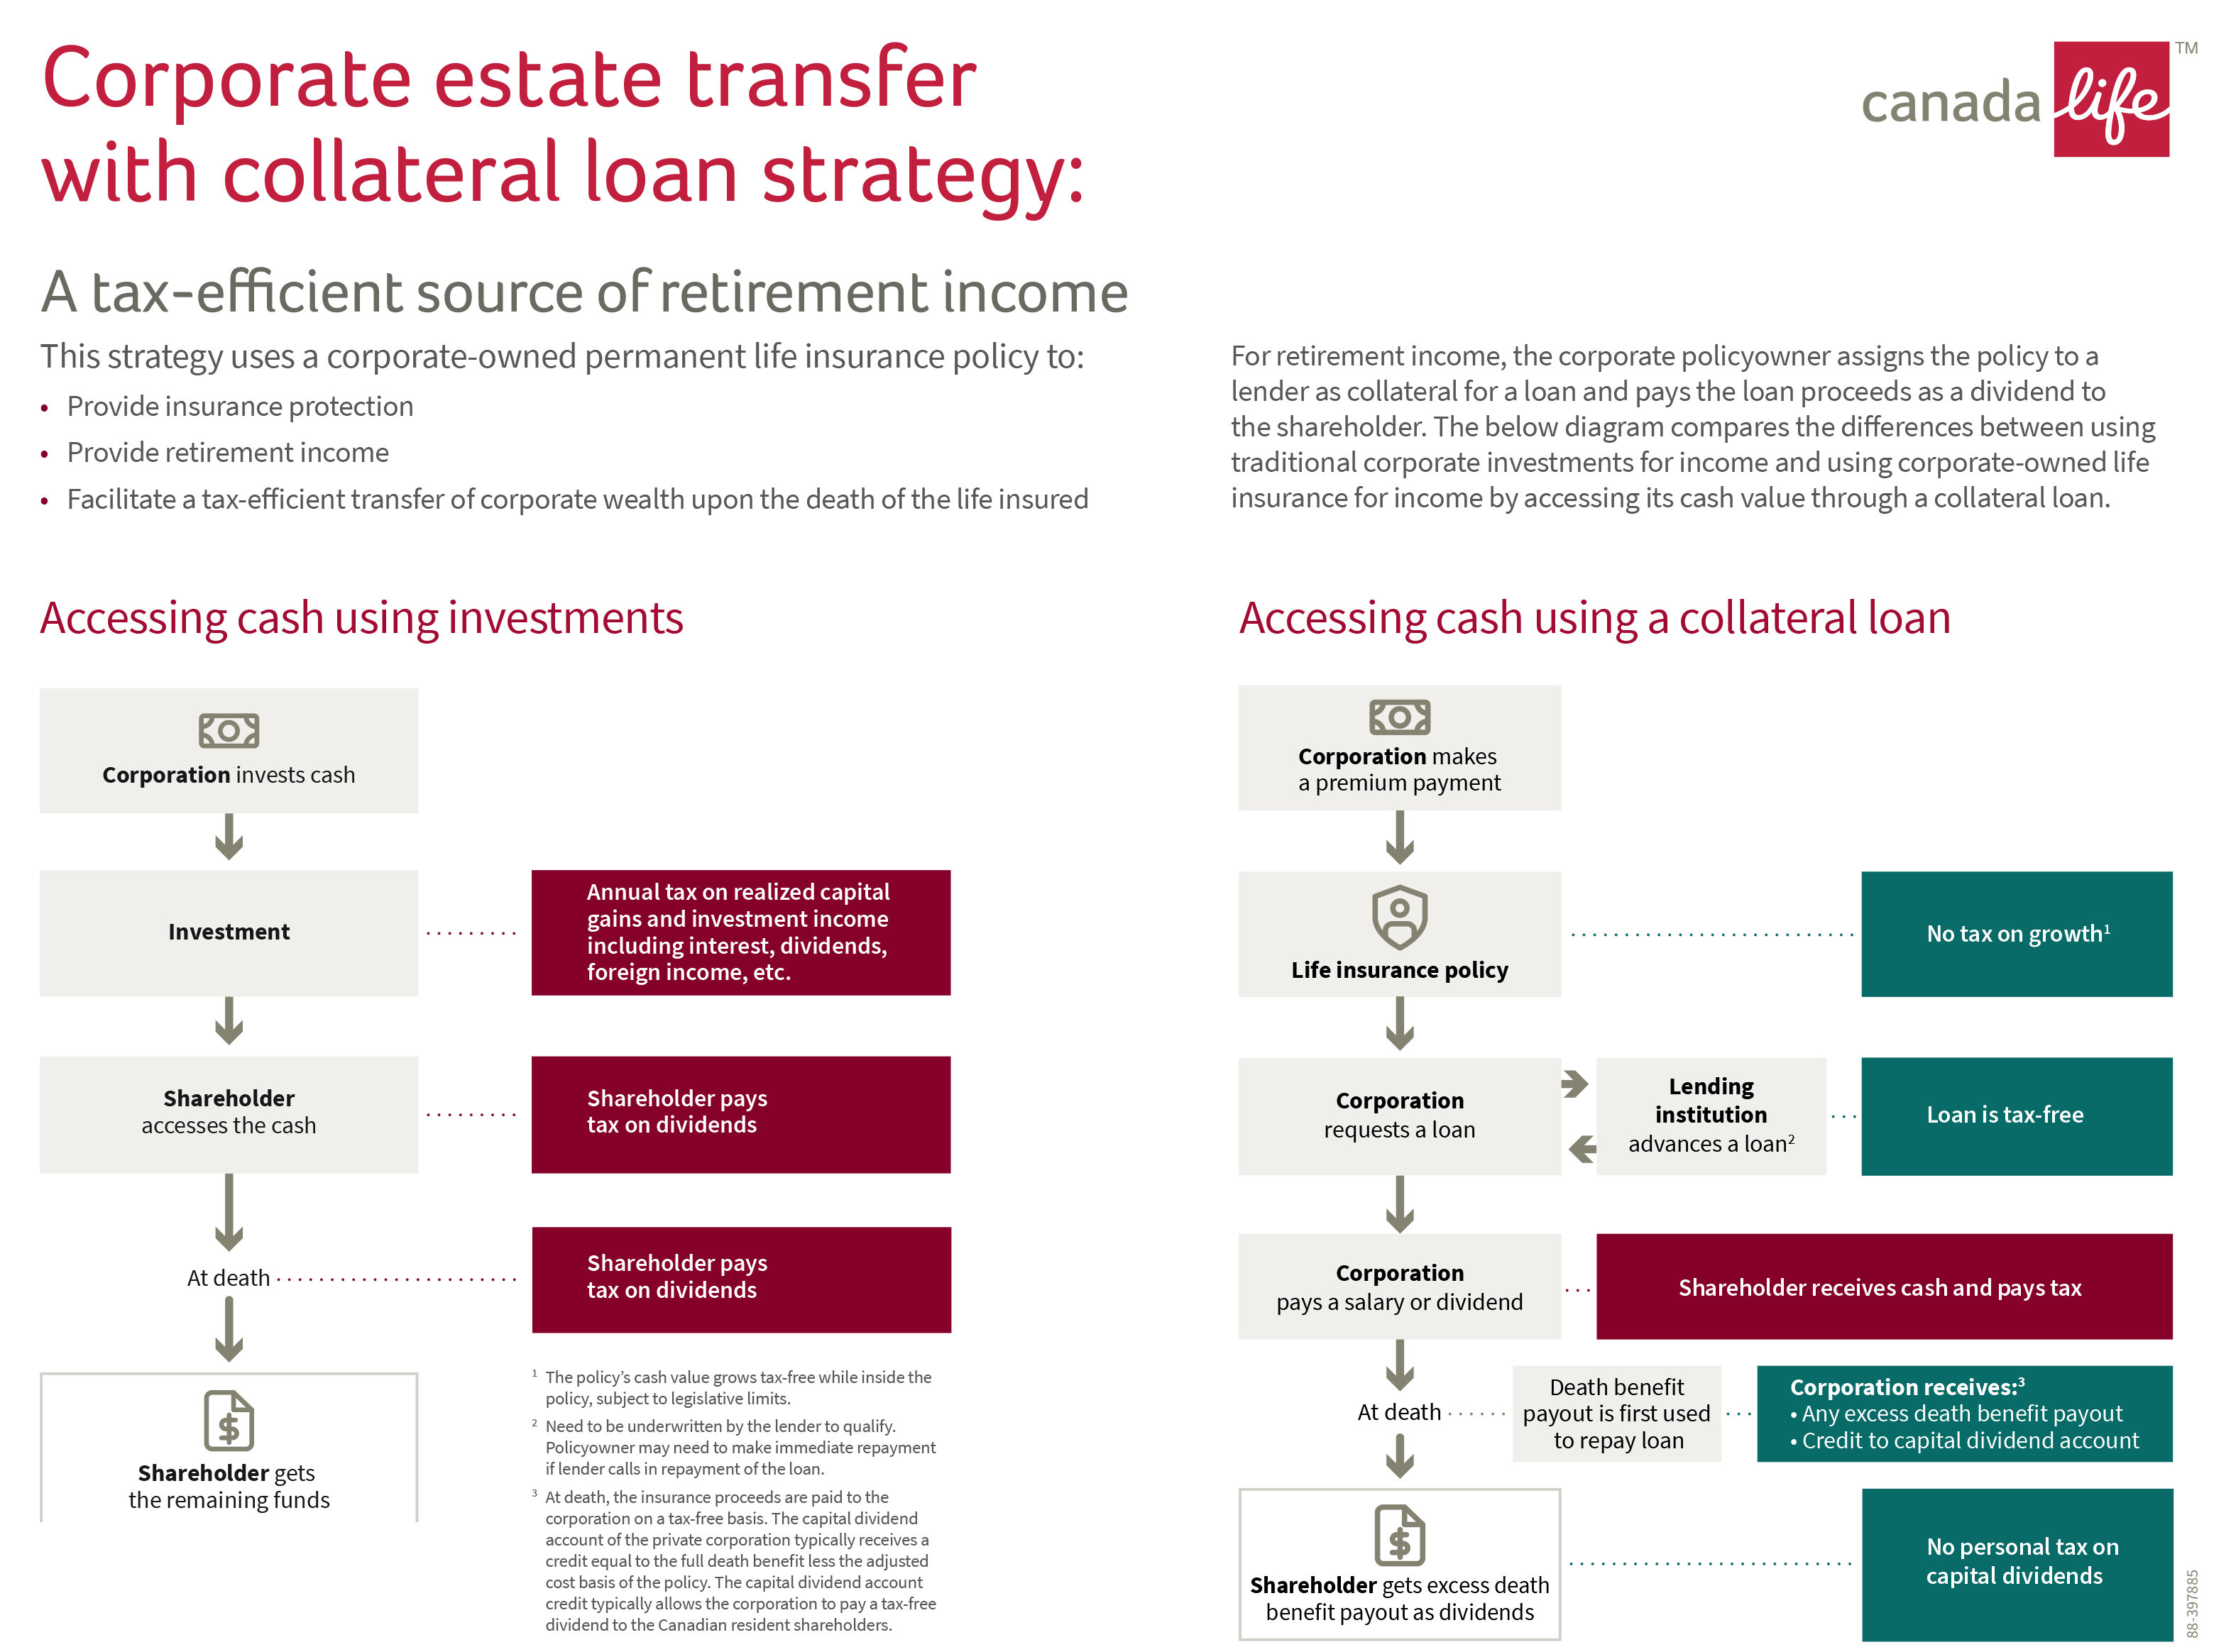 Corporate estate transfer with collateral loan strategy image